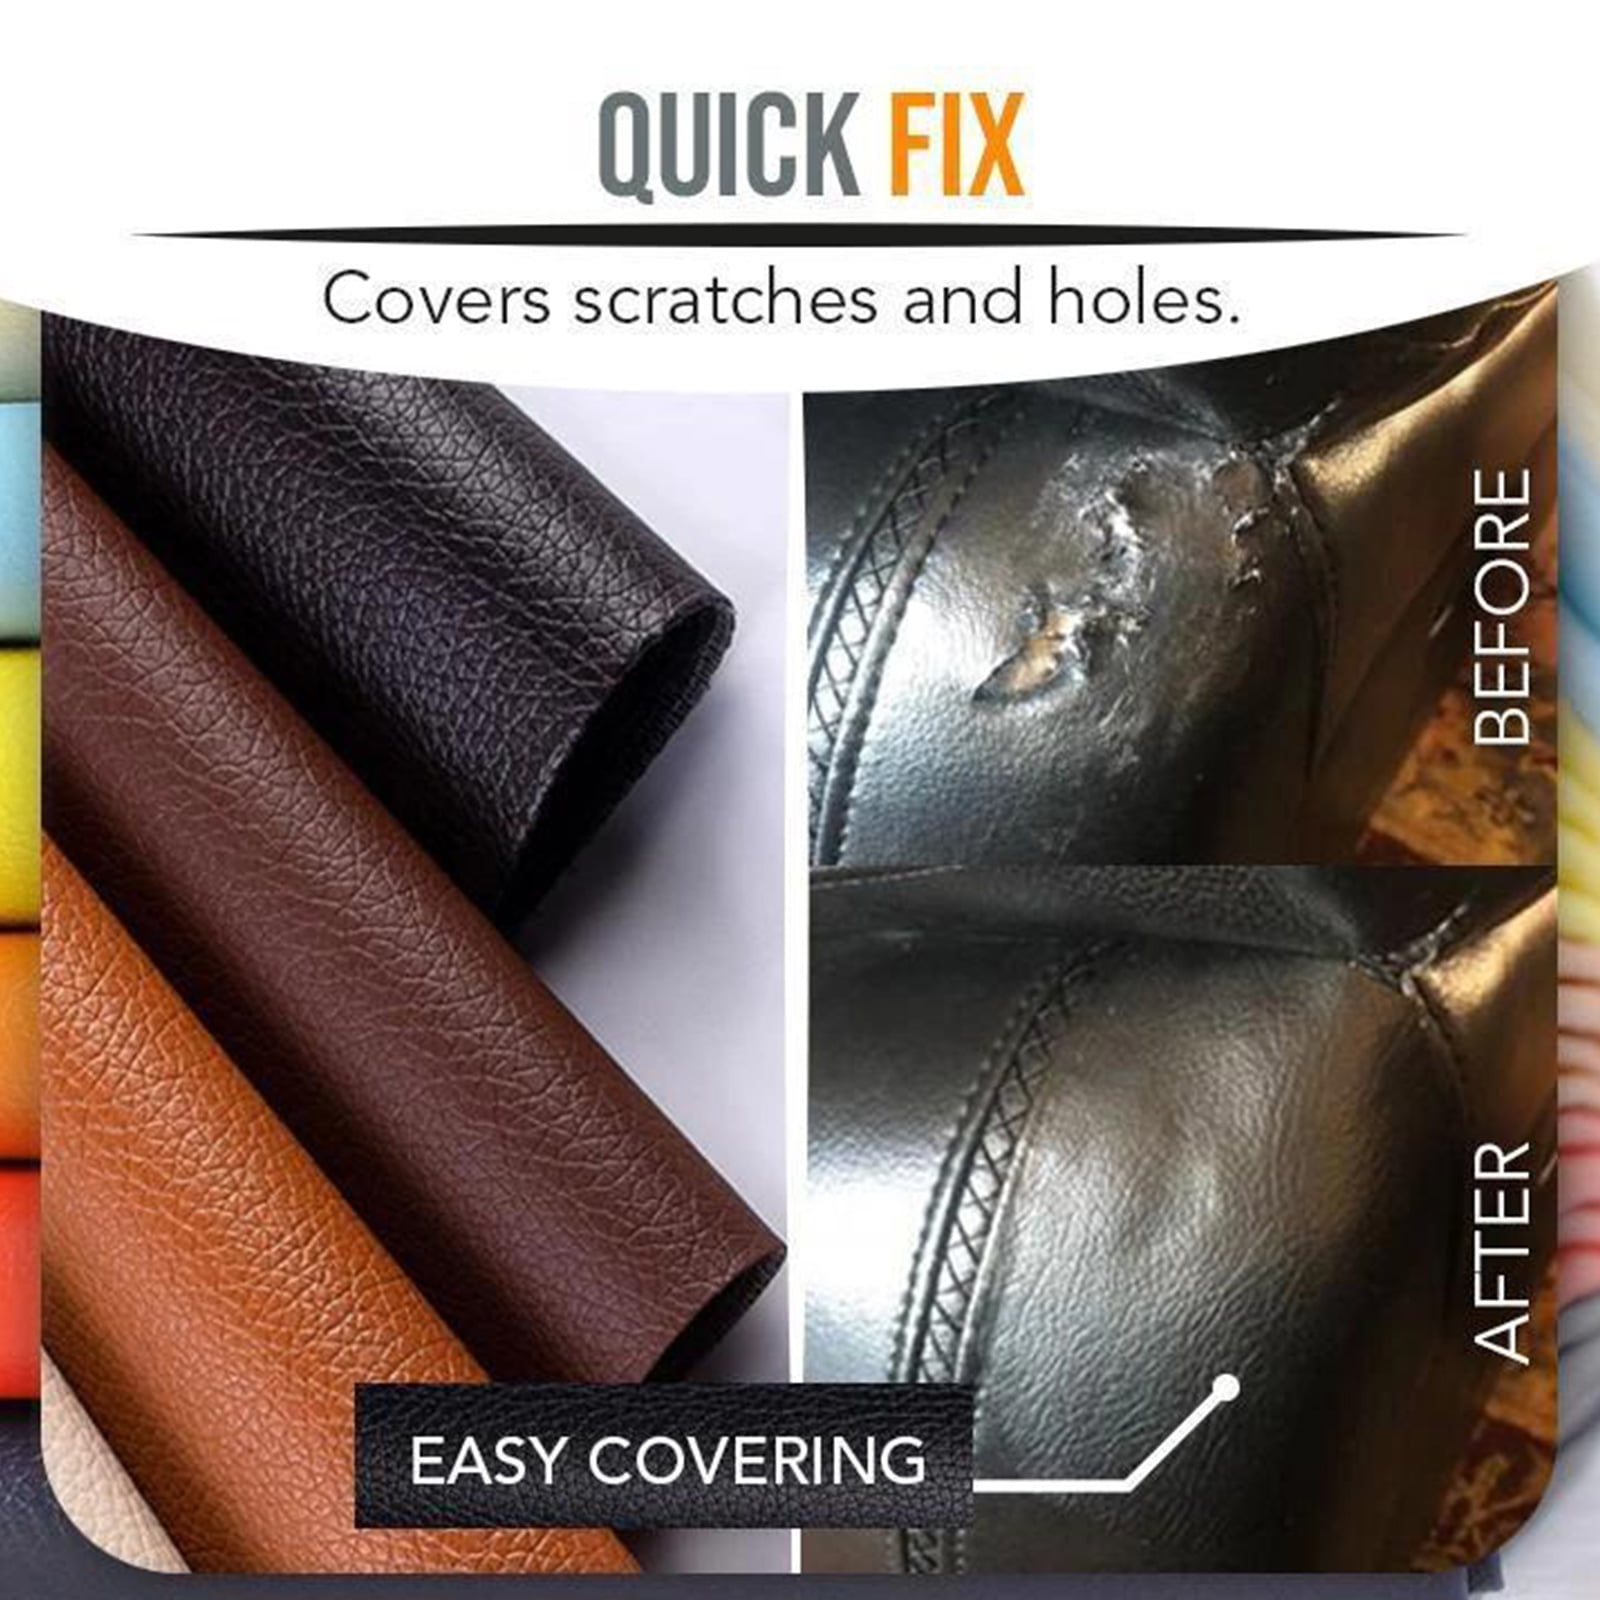 1 Roll Leather Repair Patch Self-Adhesive, 35x137cm / 50x137cm, 7 Colors Available, Cabinahome Leather Tape for Couches, Chairs, Car Seats, Bags